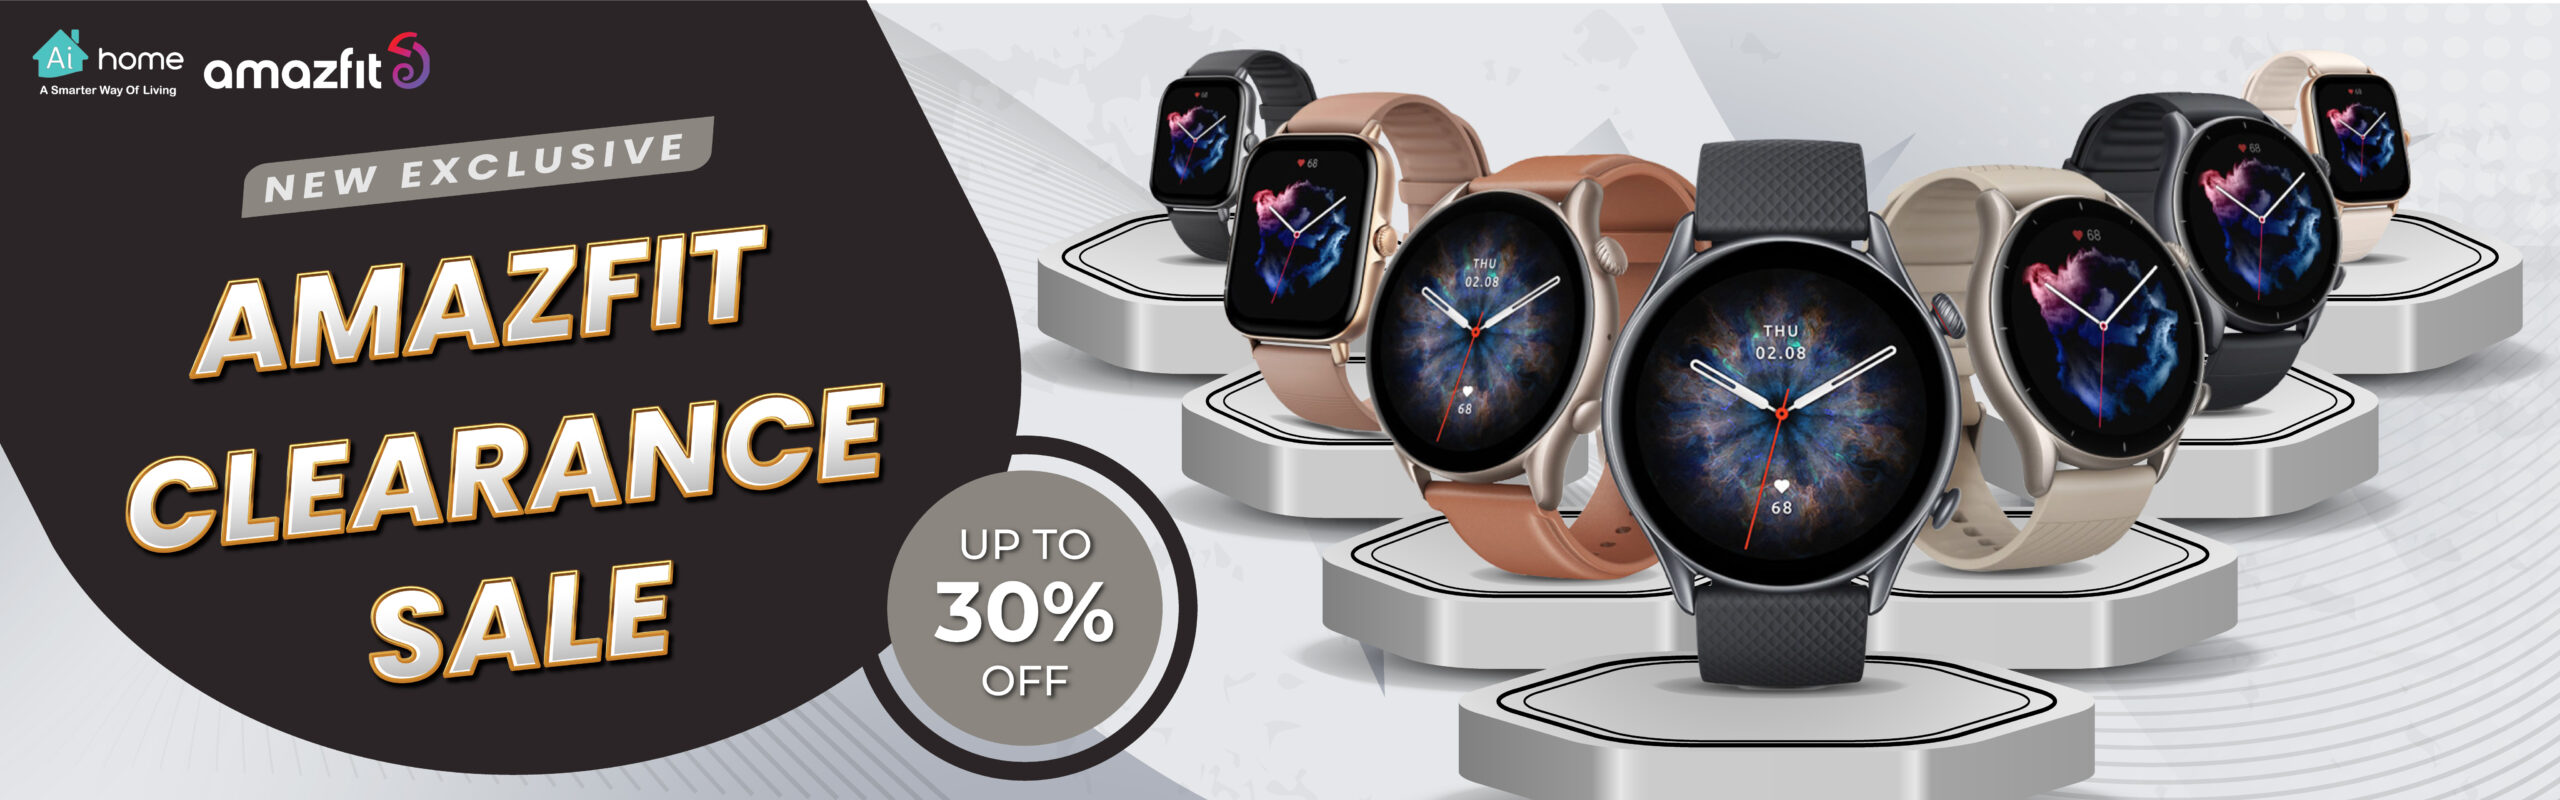 Amazfit-Clearance-Banner-(1920X600)